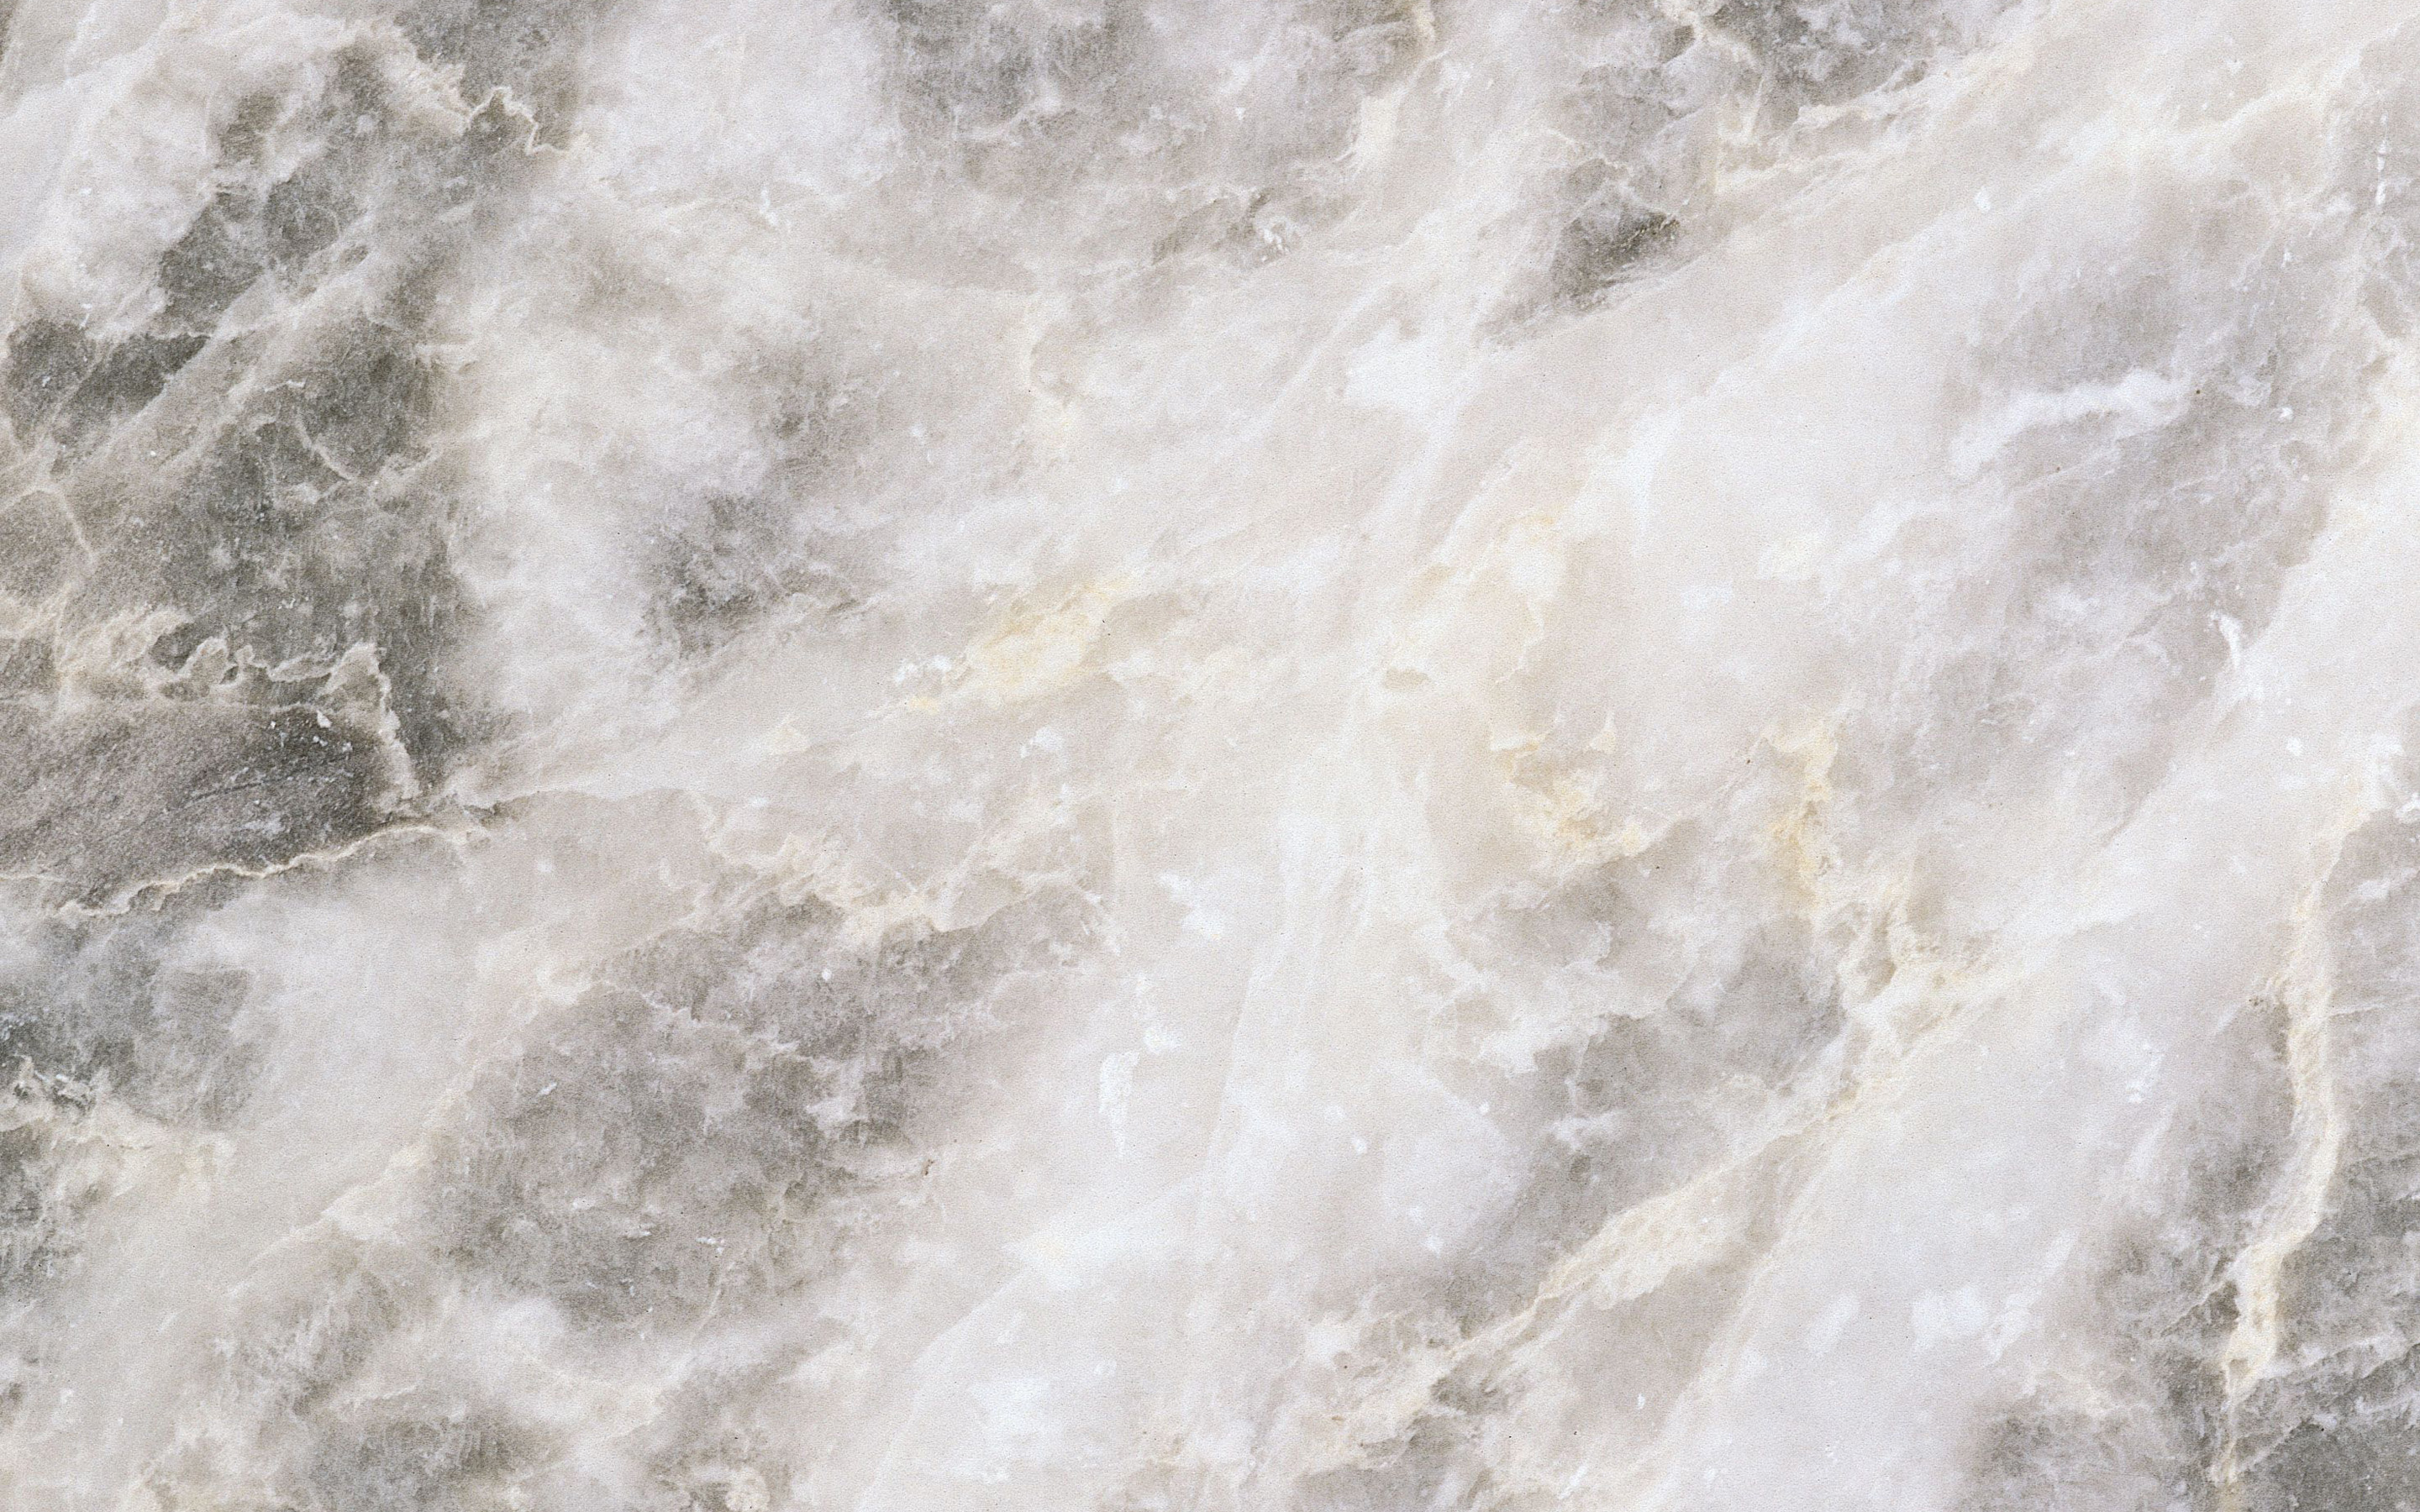 Polished Marble Texture